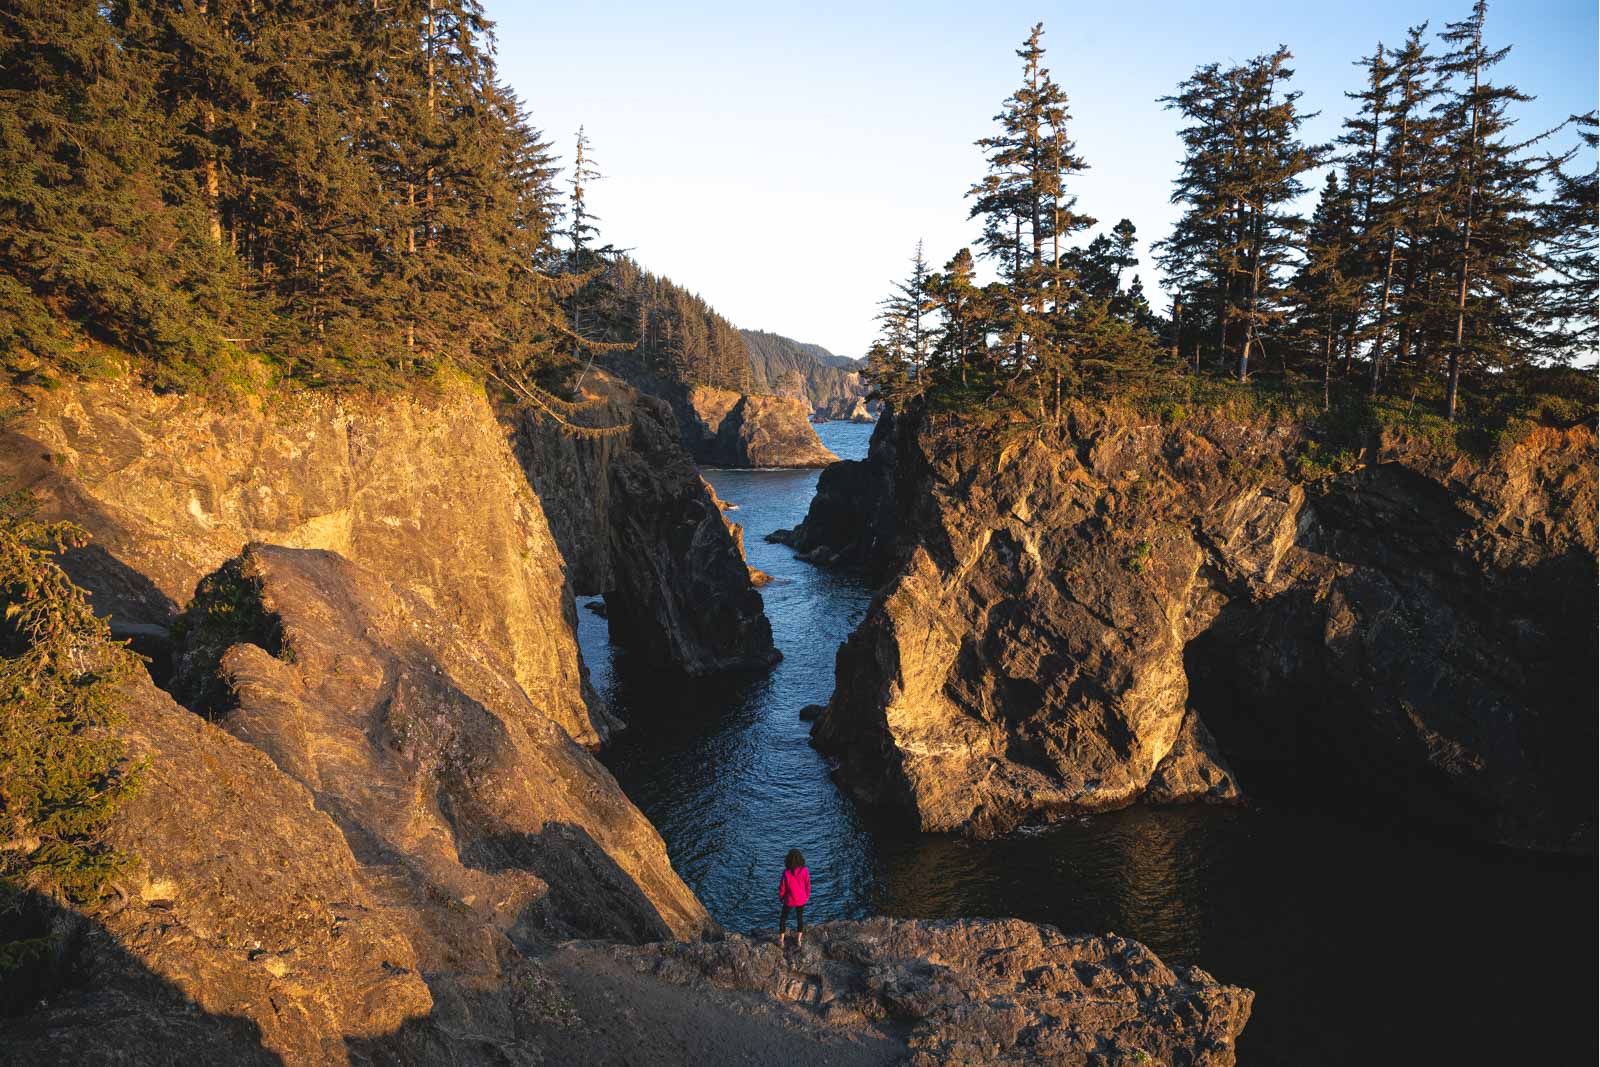 Tiny hiker in pink jacket overlooking the ocean and beautiful seastacks and rocks in the distance.